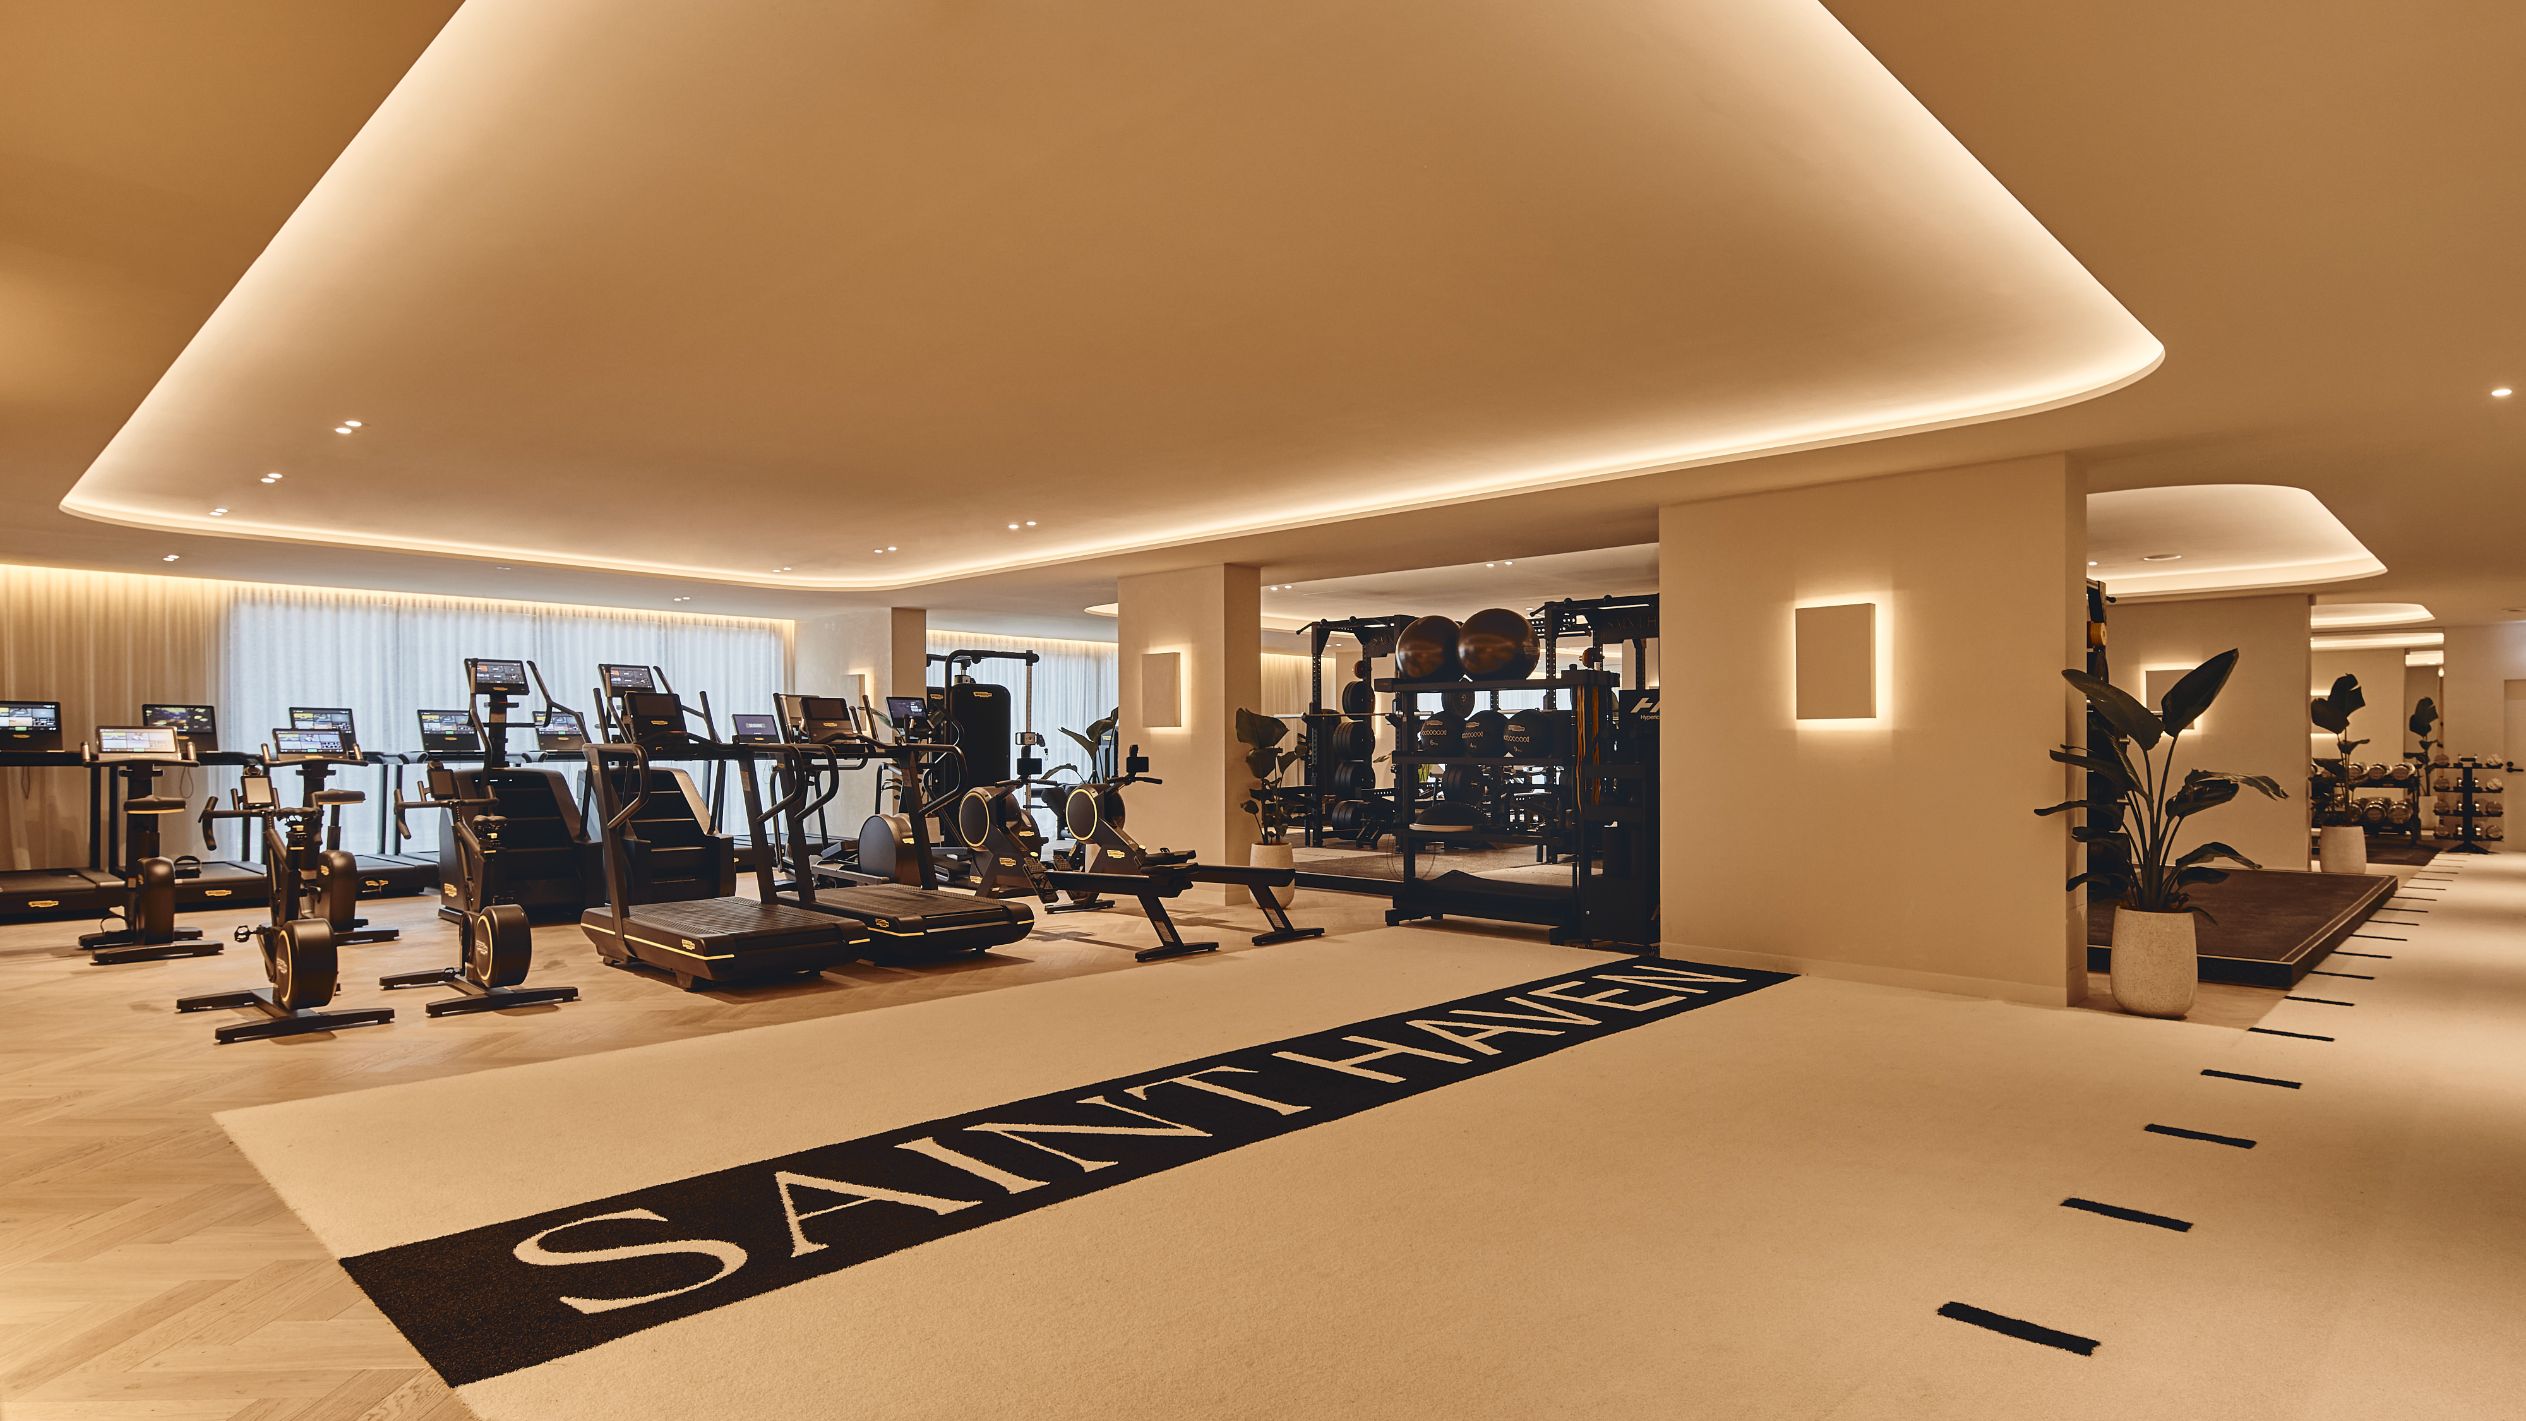 $150 Million Melbourne Member’s Only Wellness Club Saint Haven Opens Its Doors Tomorrow